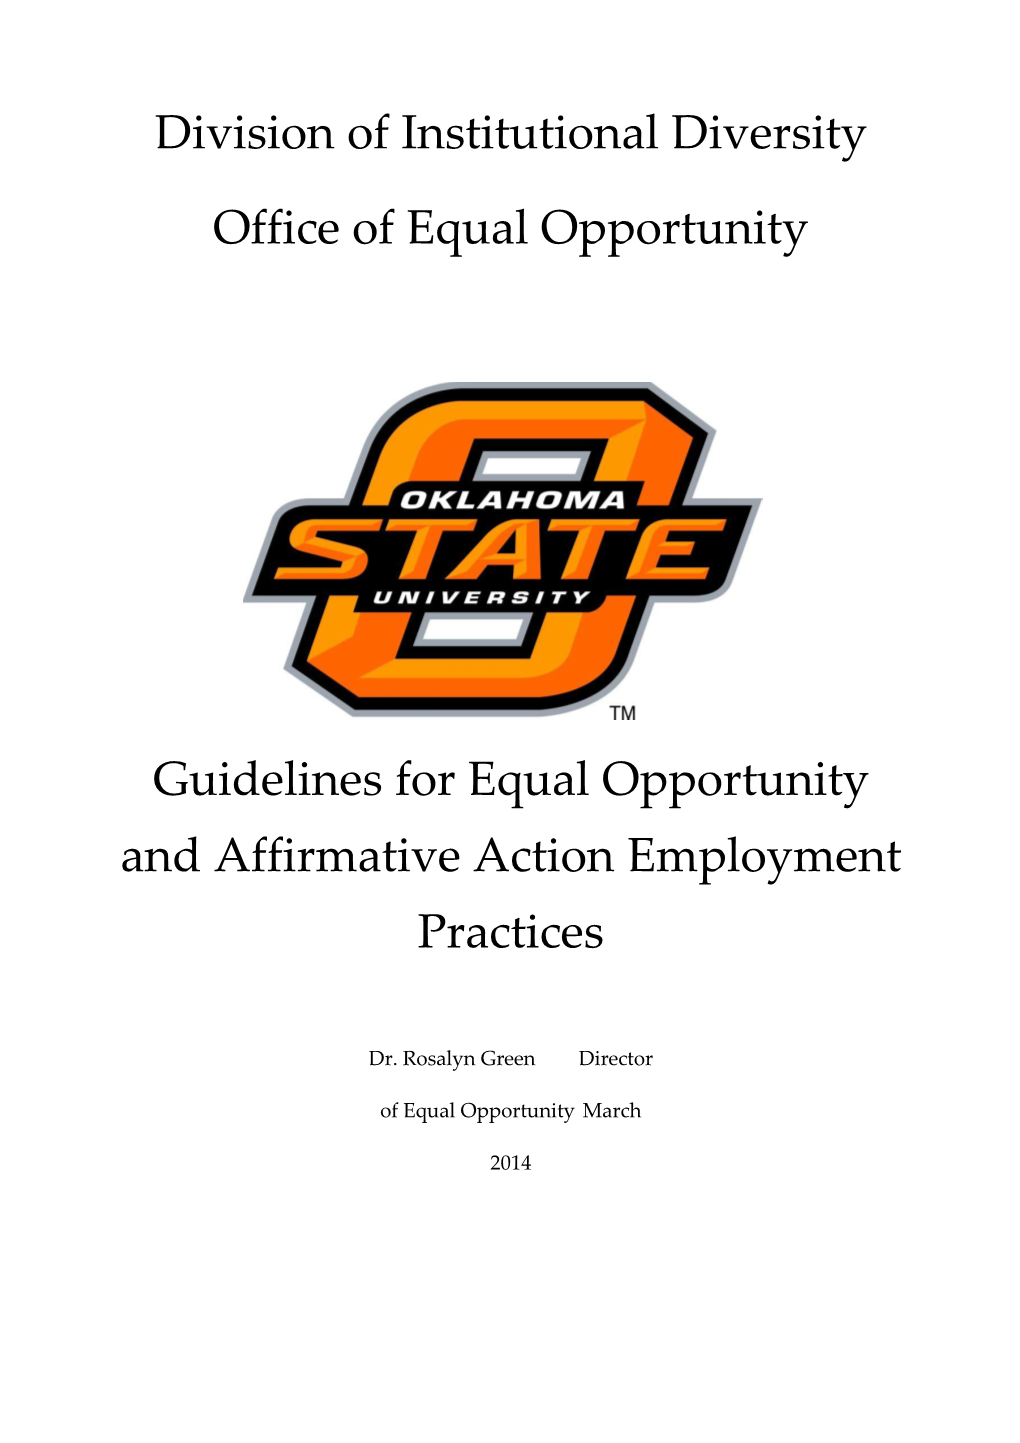 Division of Institutional Diversity Office of Equal Opportunity